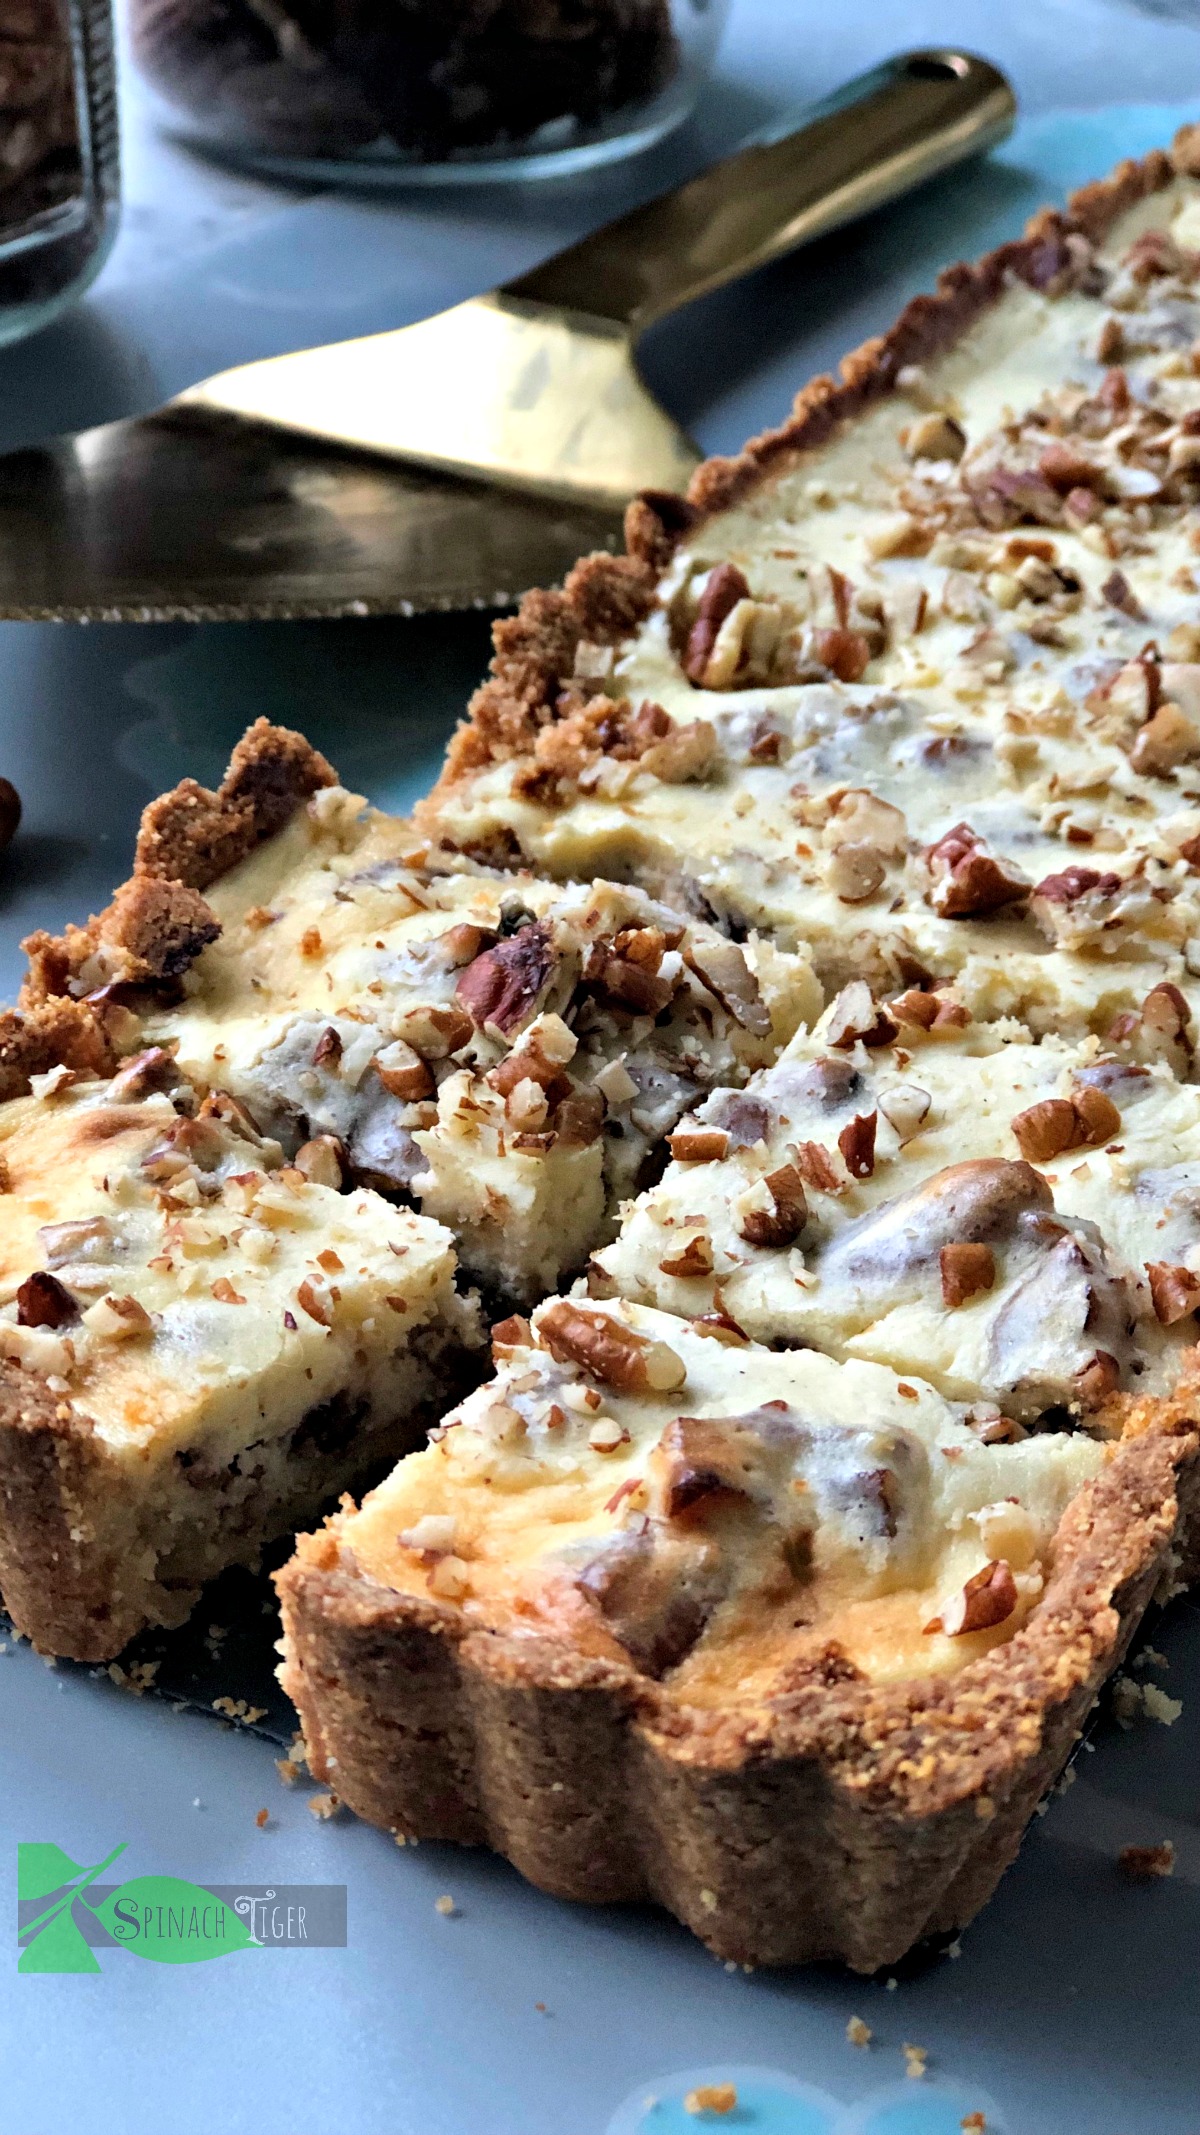 Maple Pecan Cheesecake Bars from My Favorite 2018 Recipes from Spinach Tiger